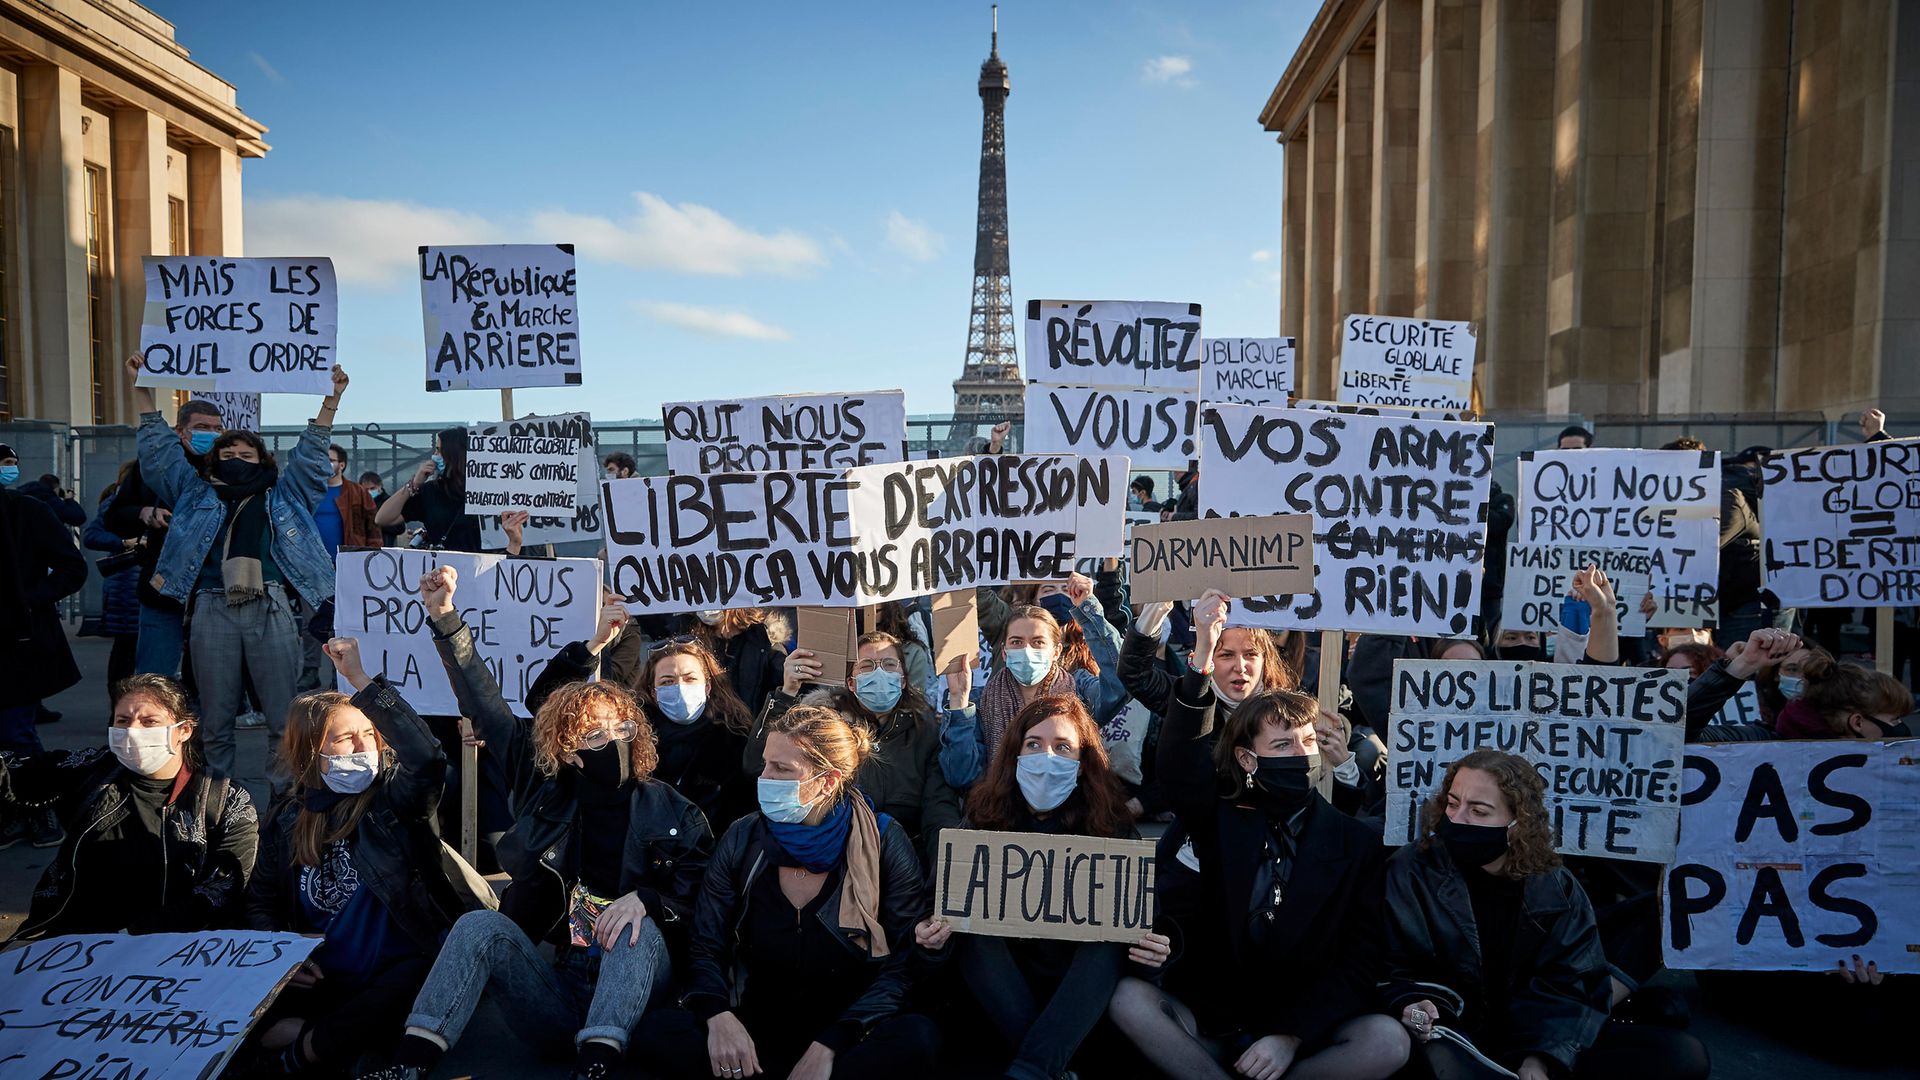 Protestors demonstrate against the Global Security bill in Paris - Credit: Getty Images